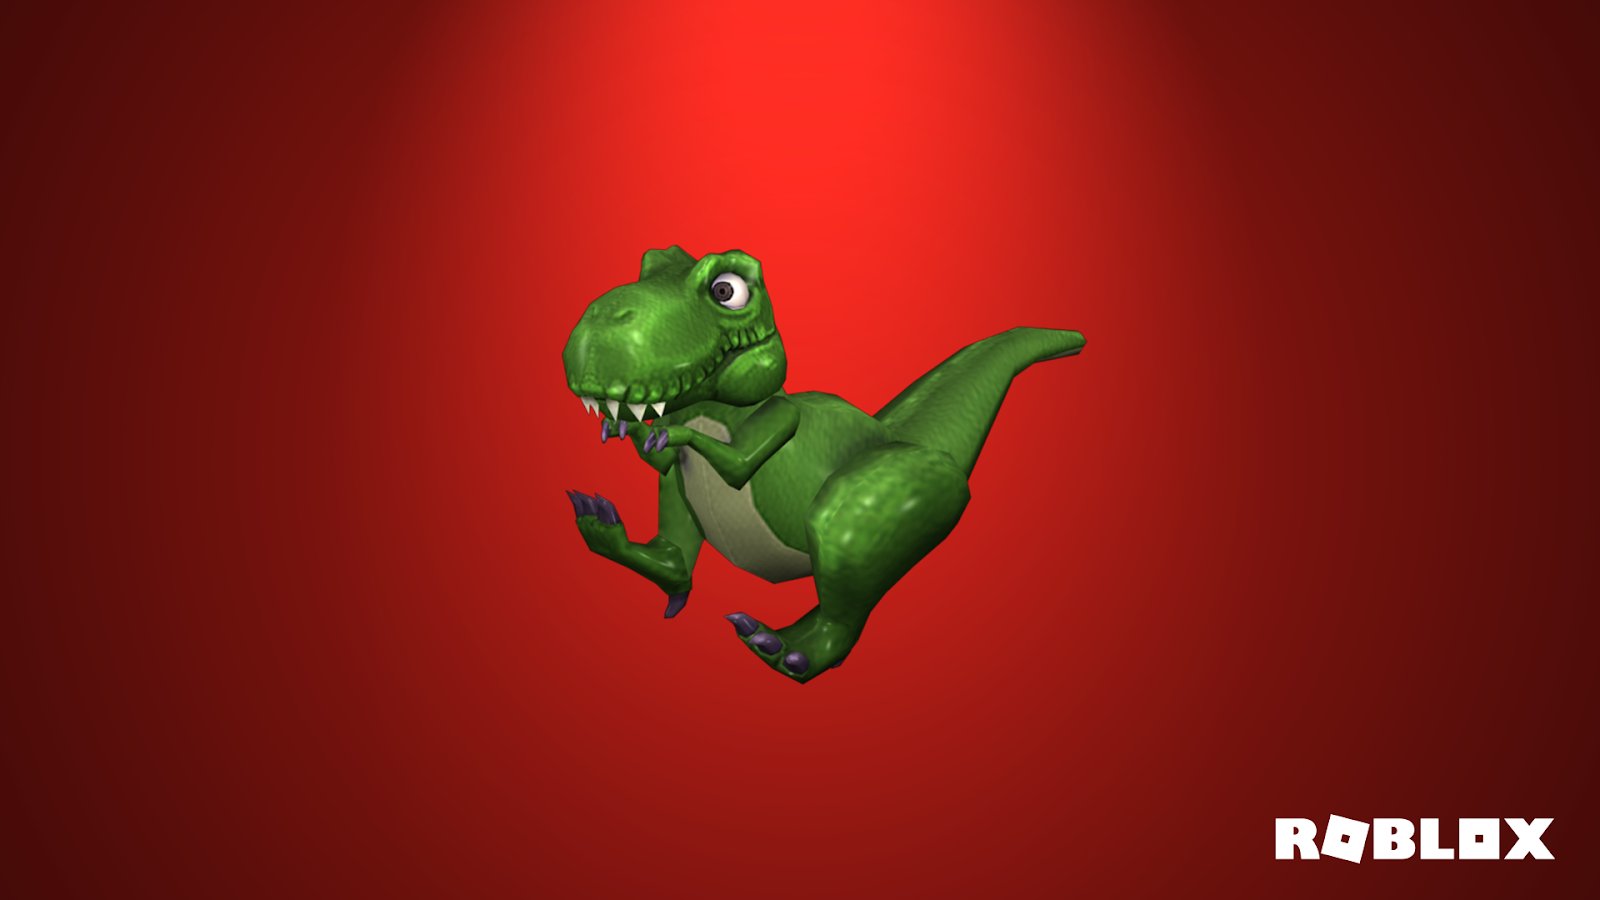 Roblox On Twitter He S Happy To Ride On Your Shoulder So Long As You Help Him Reach Stuff On The Top Shelves Shoulder T Rex Https T Co Kfiry1k4ve Memorialdayweekend Roblox Https T Co Tfi8kmyckz - cold on twitter my roblox toys are finally here roblox